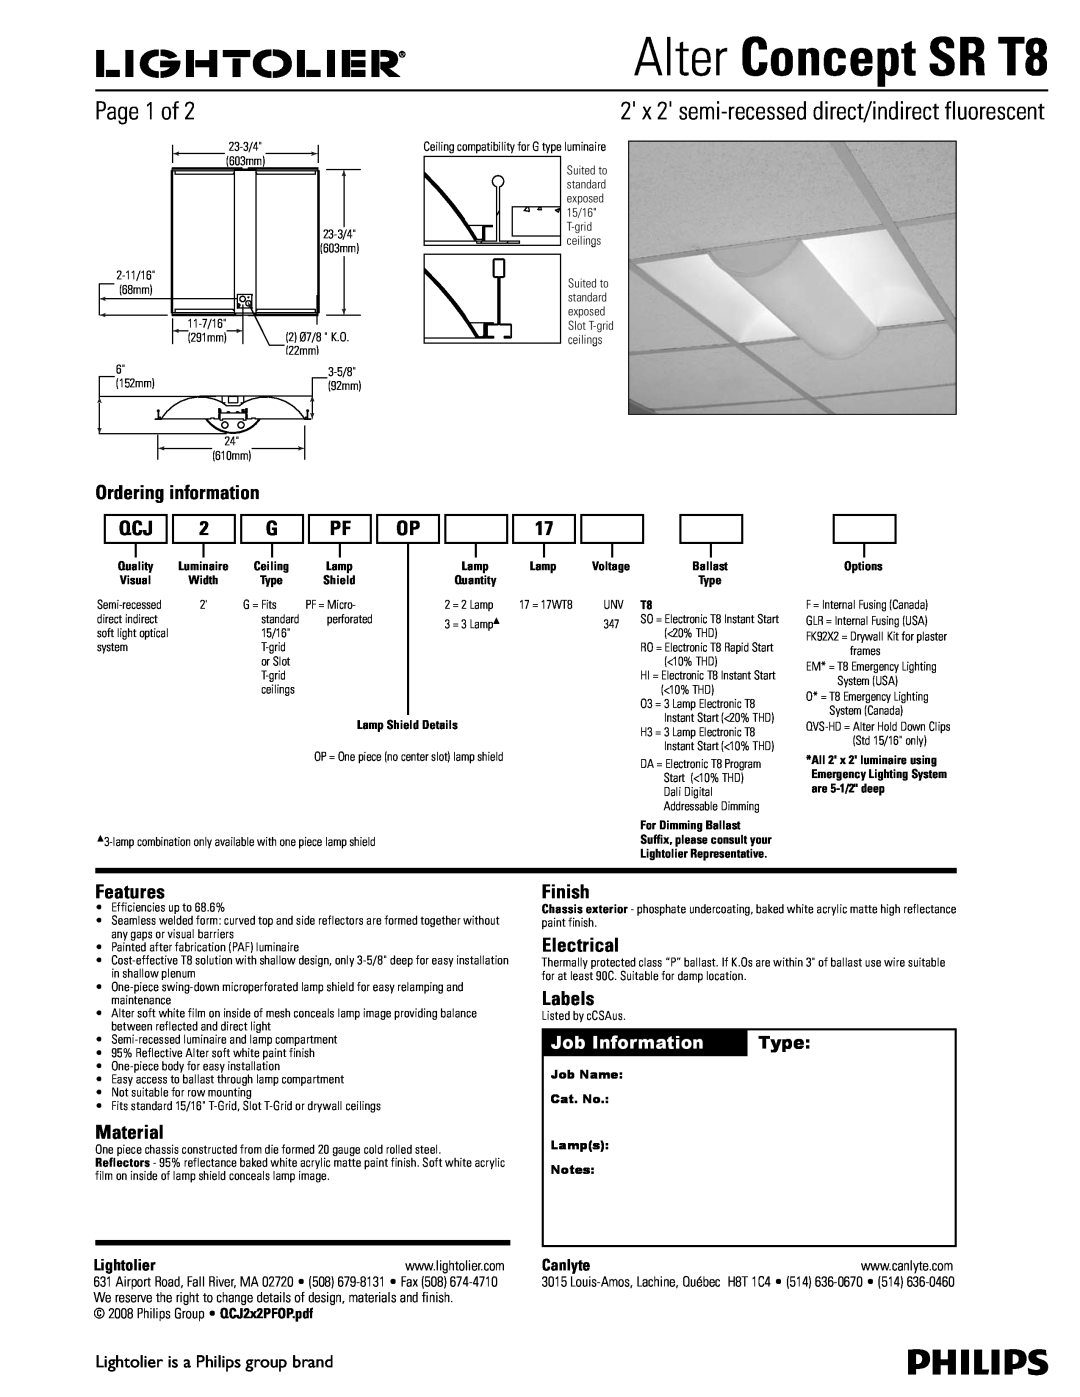 Lightolier manual Alter Concept SR T8, Page 1 of, 2 x 2 semi-recesseddirect/indirect fluorescent, Ordering information 